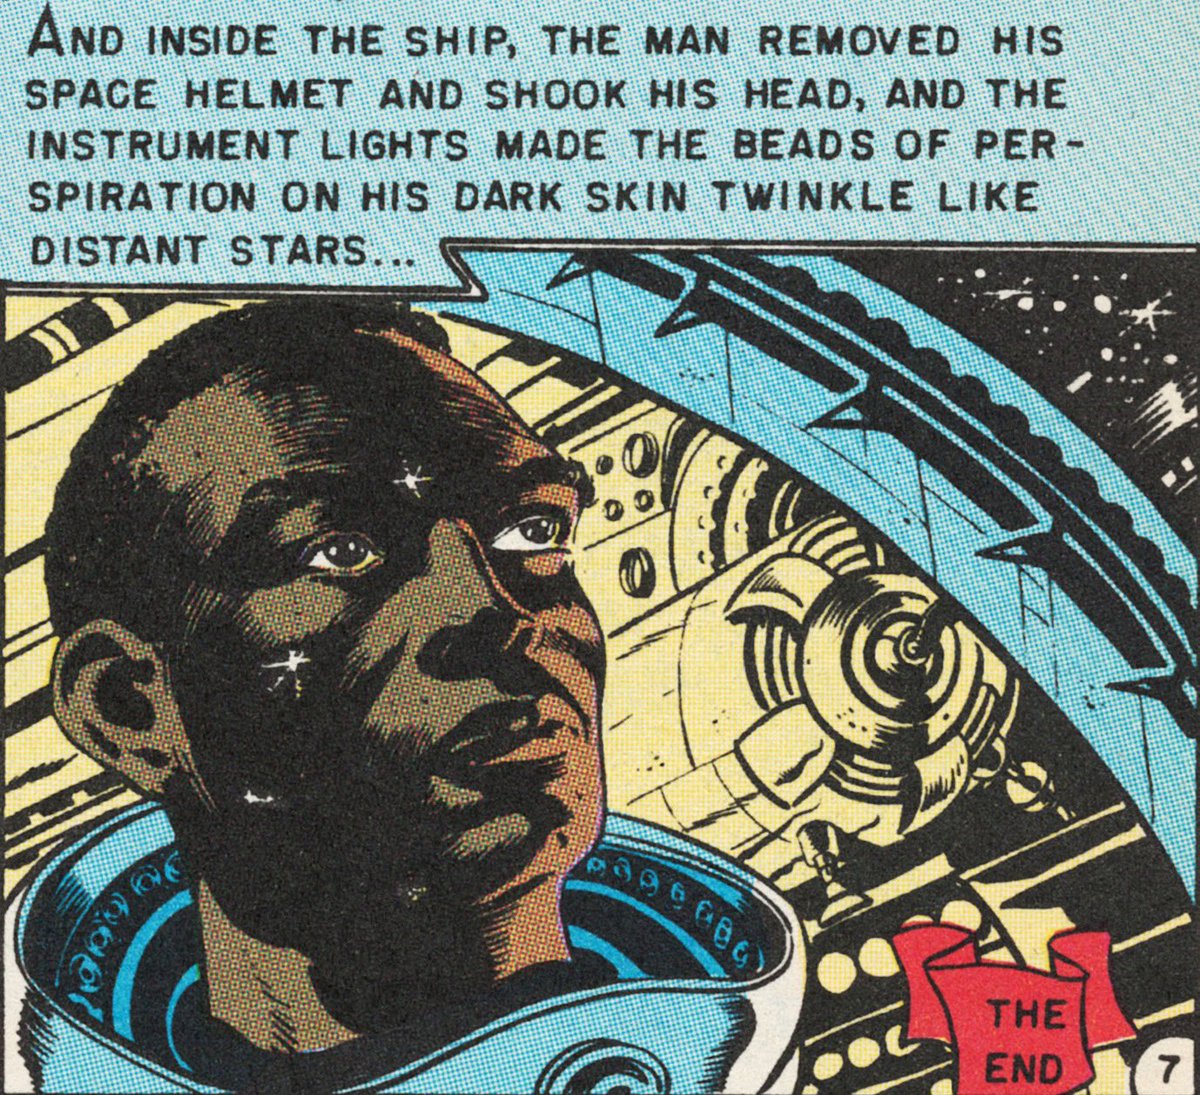 JUDGEMENT DAY, originally published in 1953. Comic Code Administrator Judge Charles Murphy rejected this story because the astronaut was Black. William Gaines, EC’s publisher, ran the story anyway. Art by Joe Orlando.